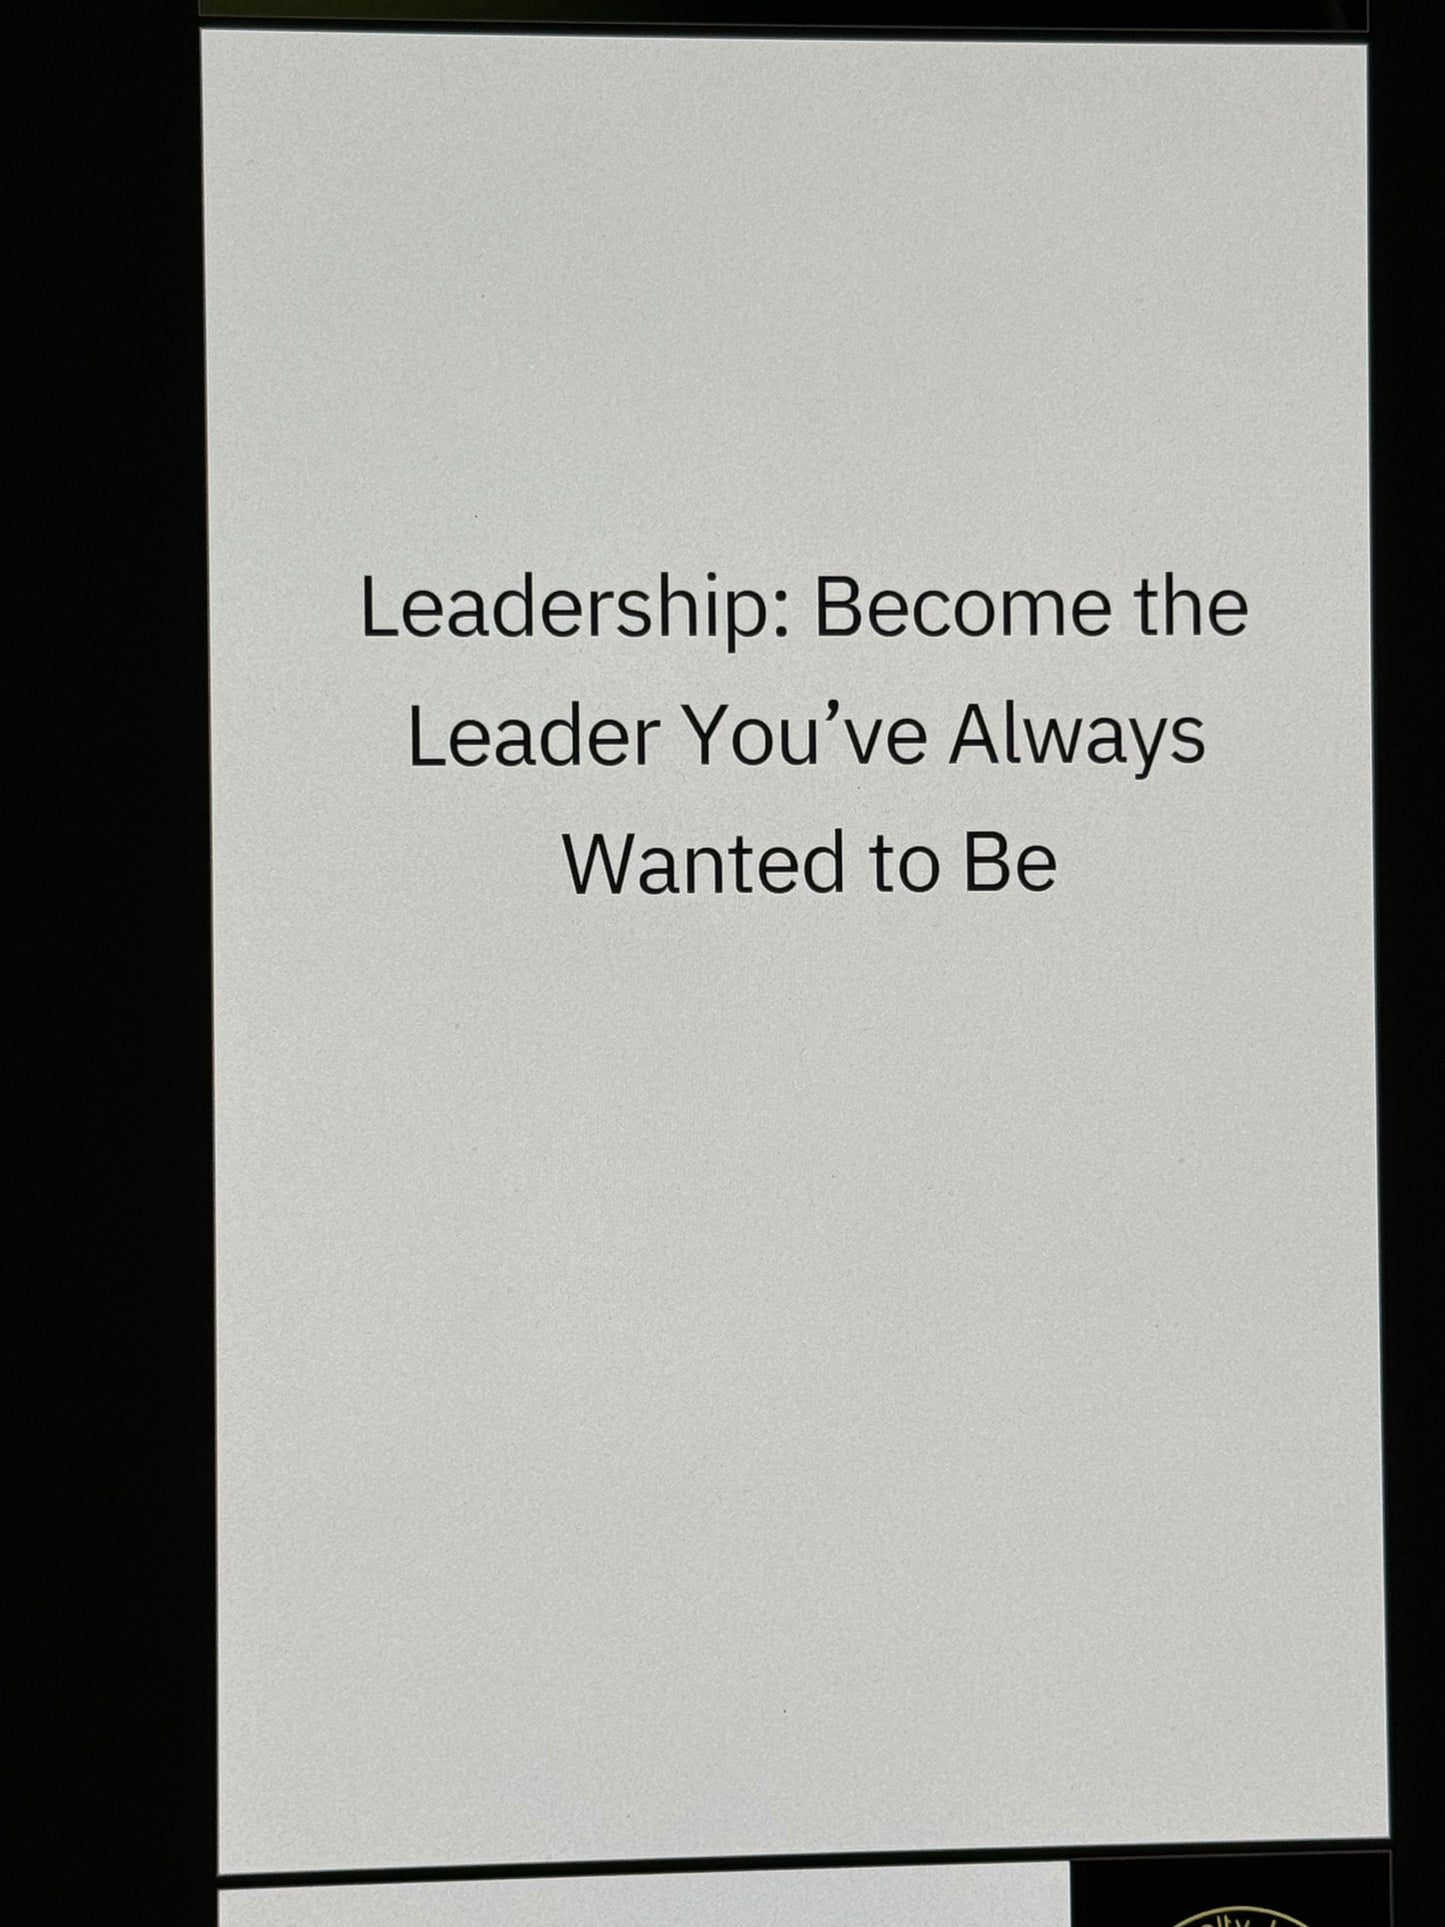 Leadership: Become The Leader You've Always Wanted To Be